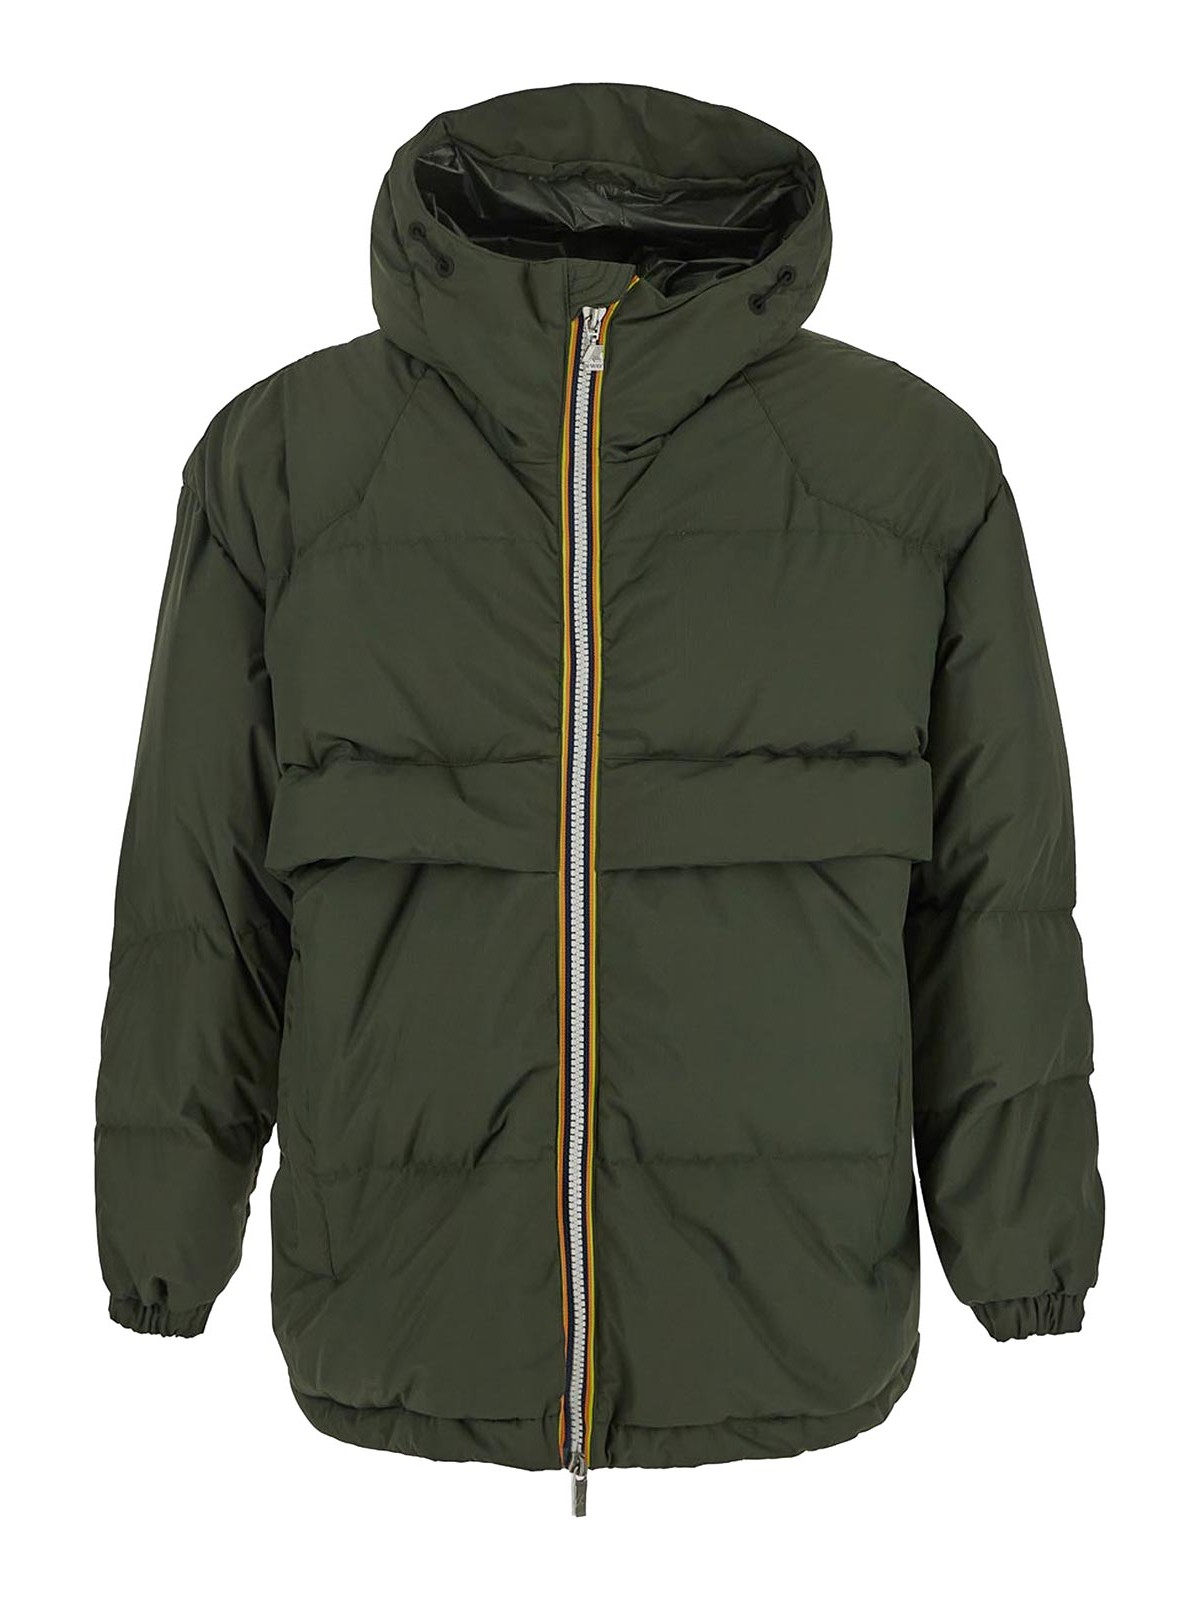 K-way Jacket With Pockets In Verde